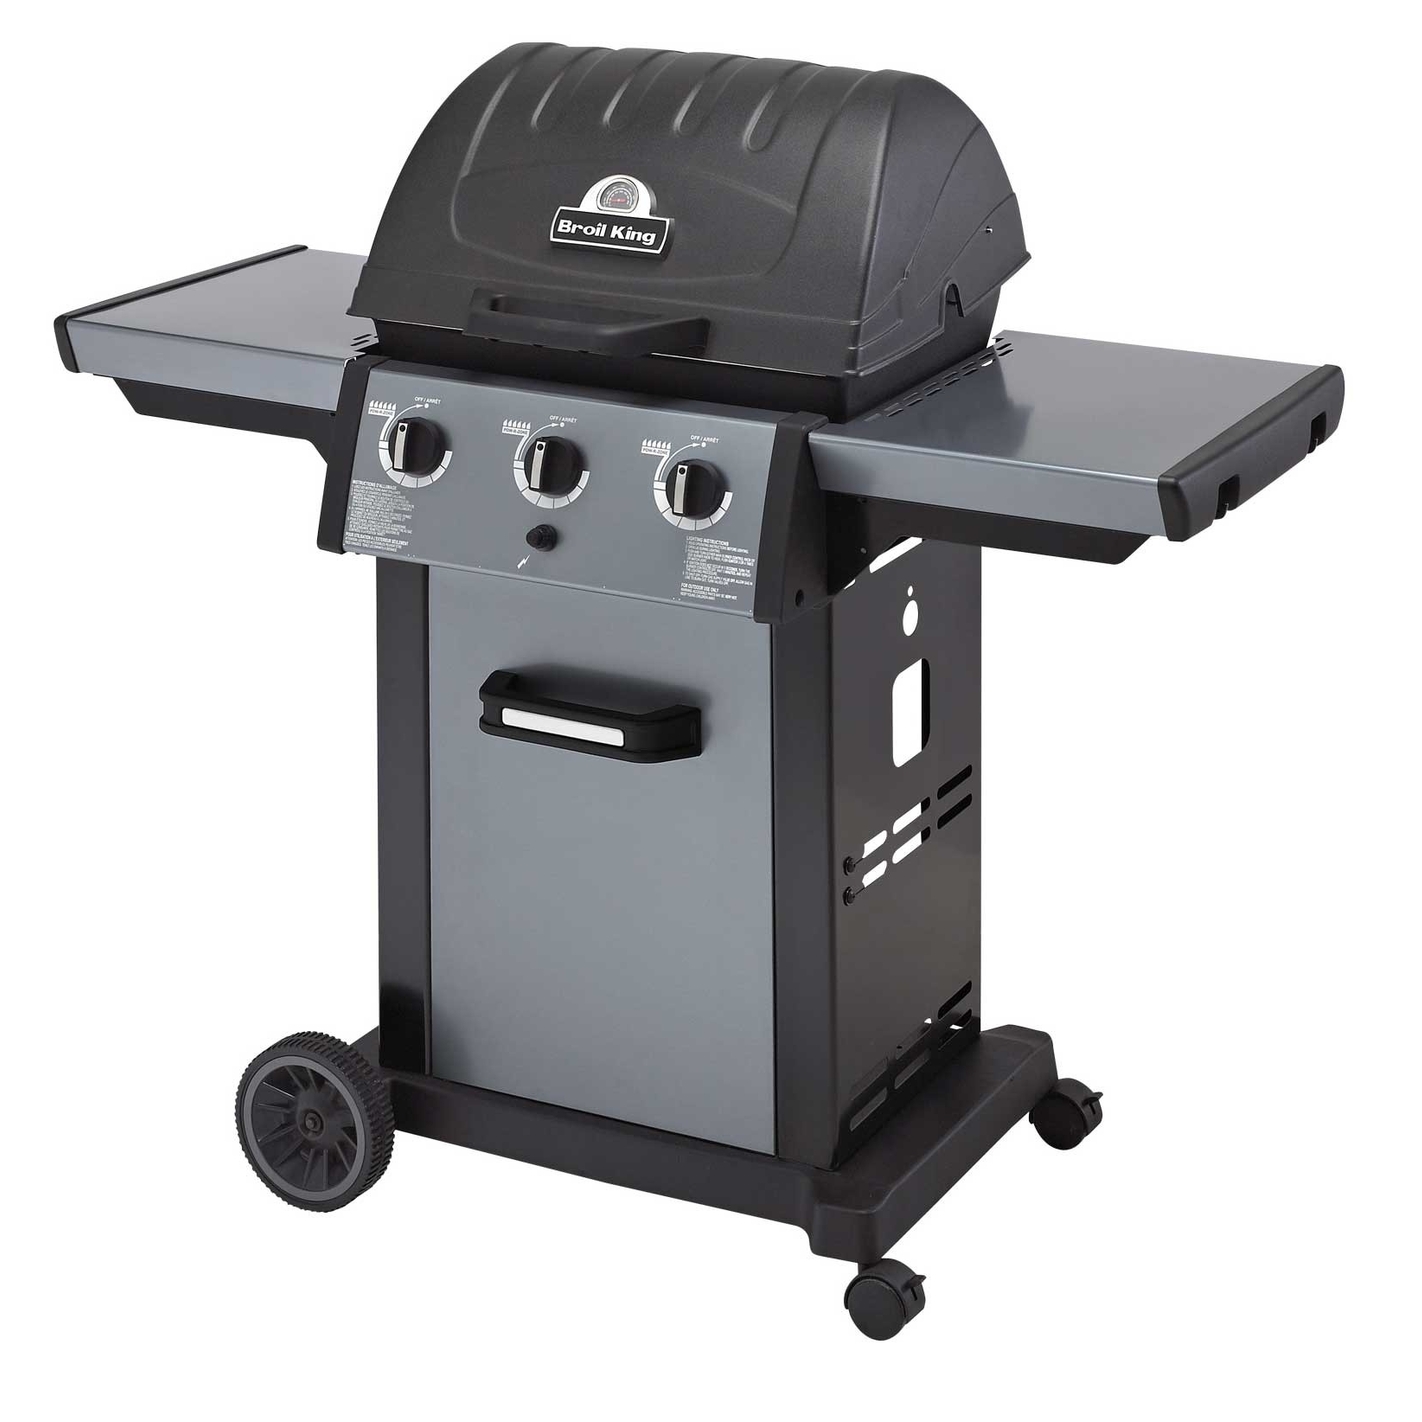 barbecue weber o broil king